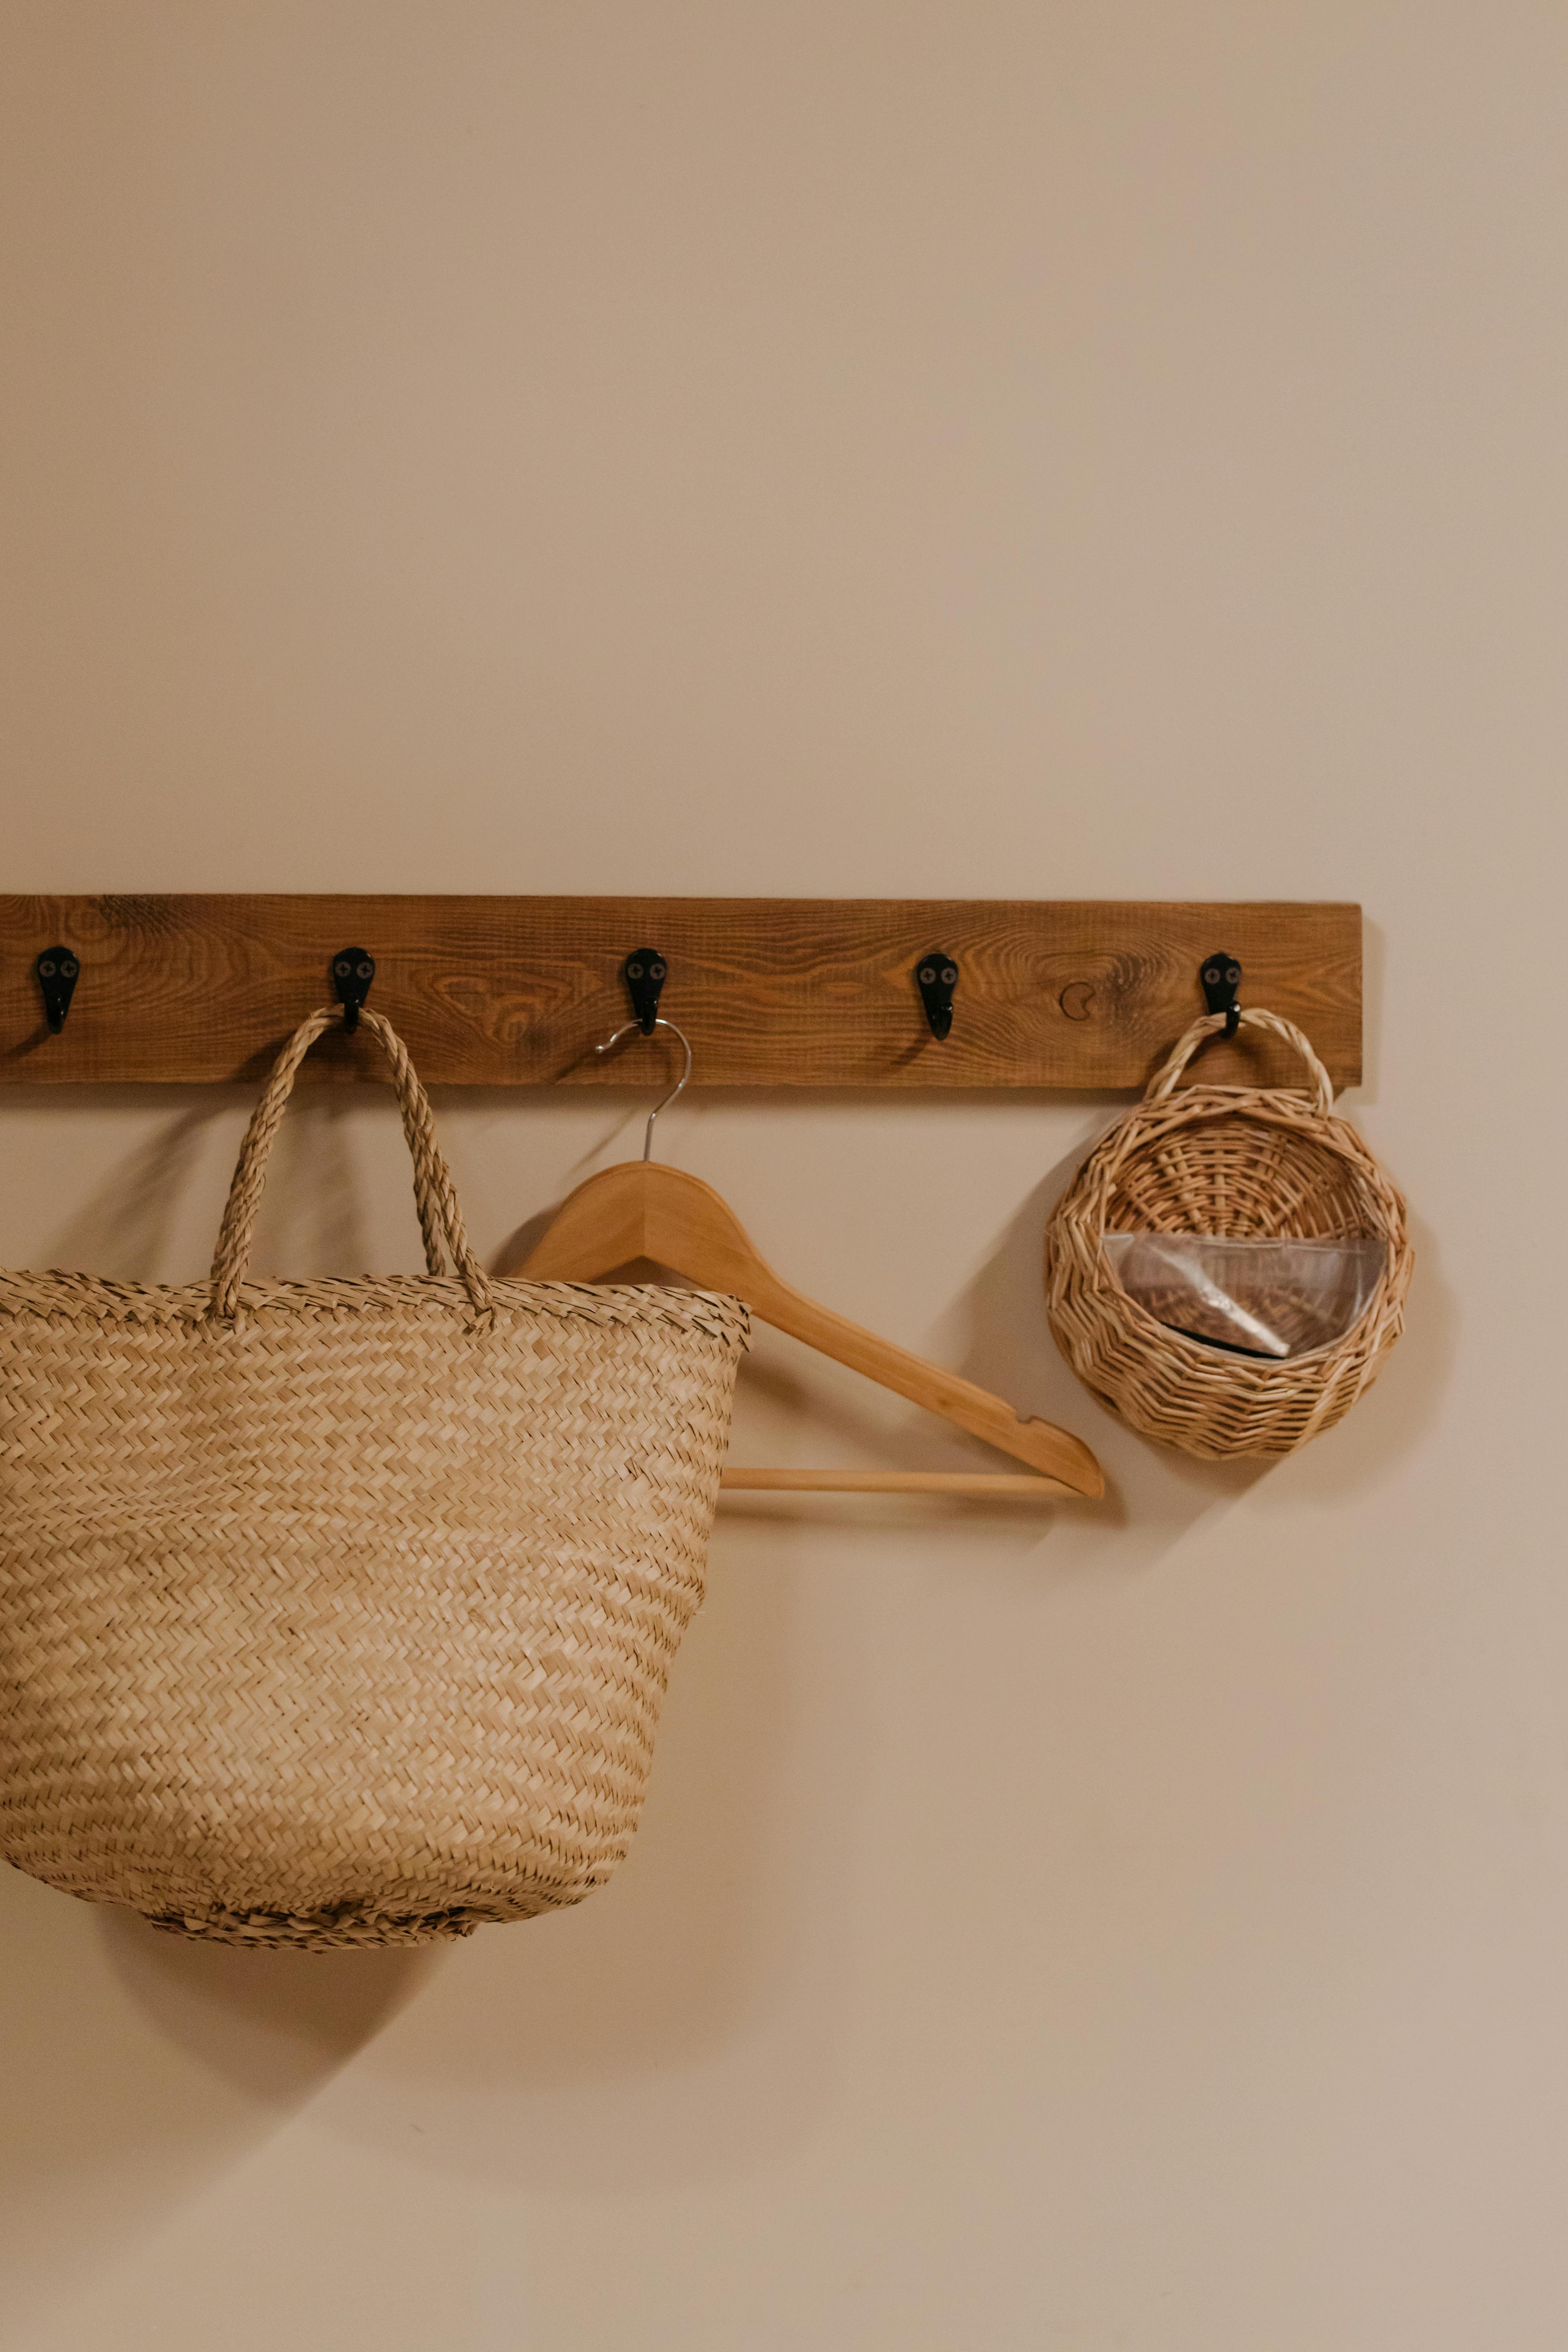 brown woven tote bag hanged on beige wall